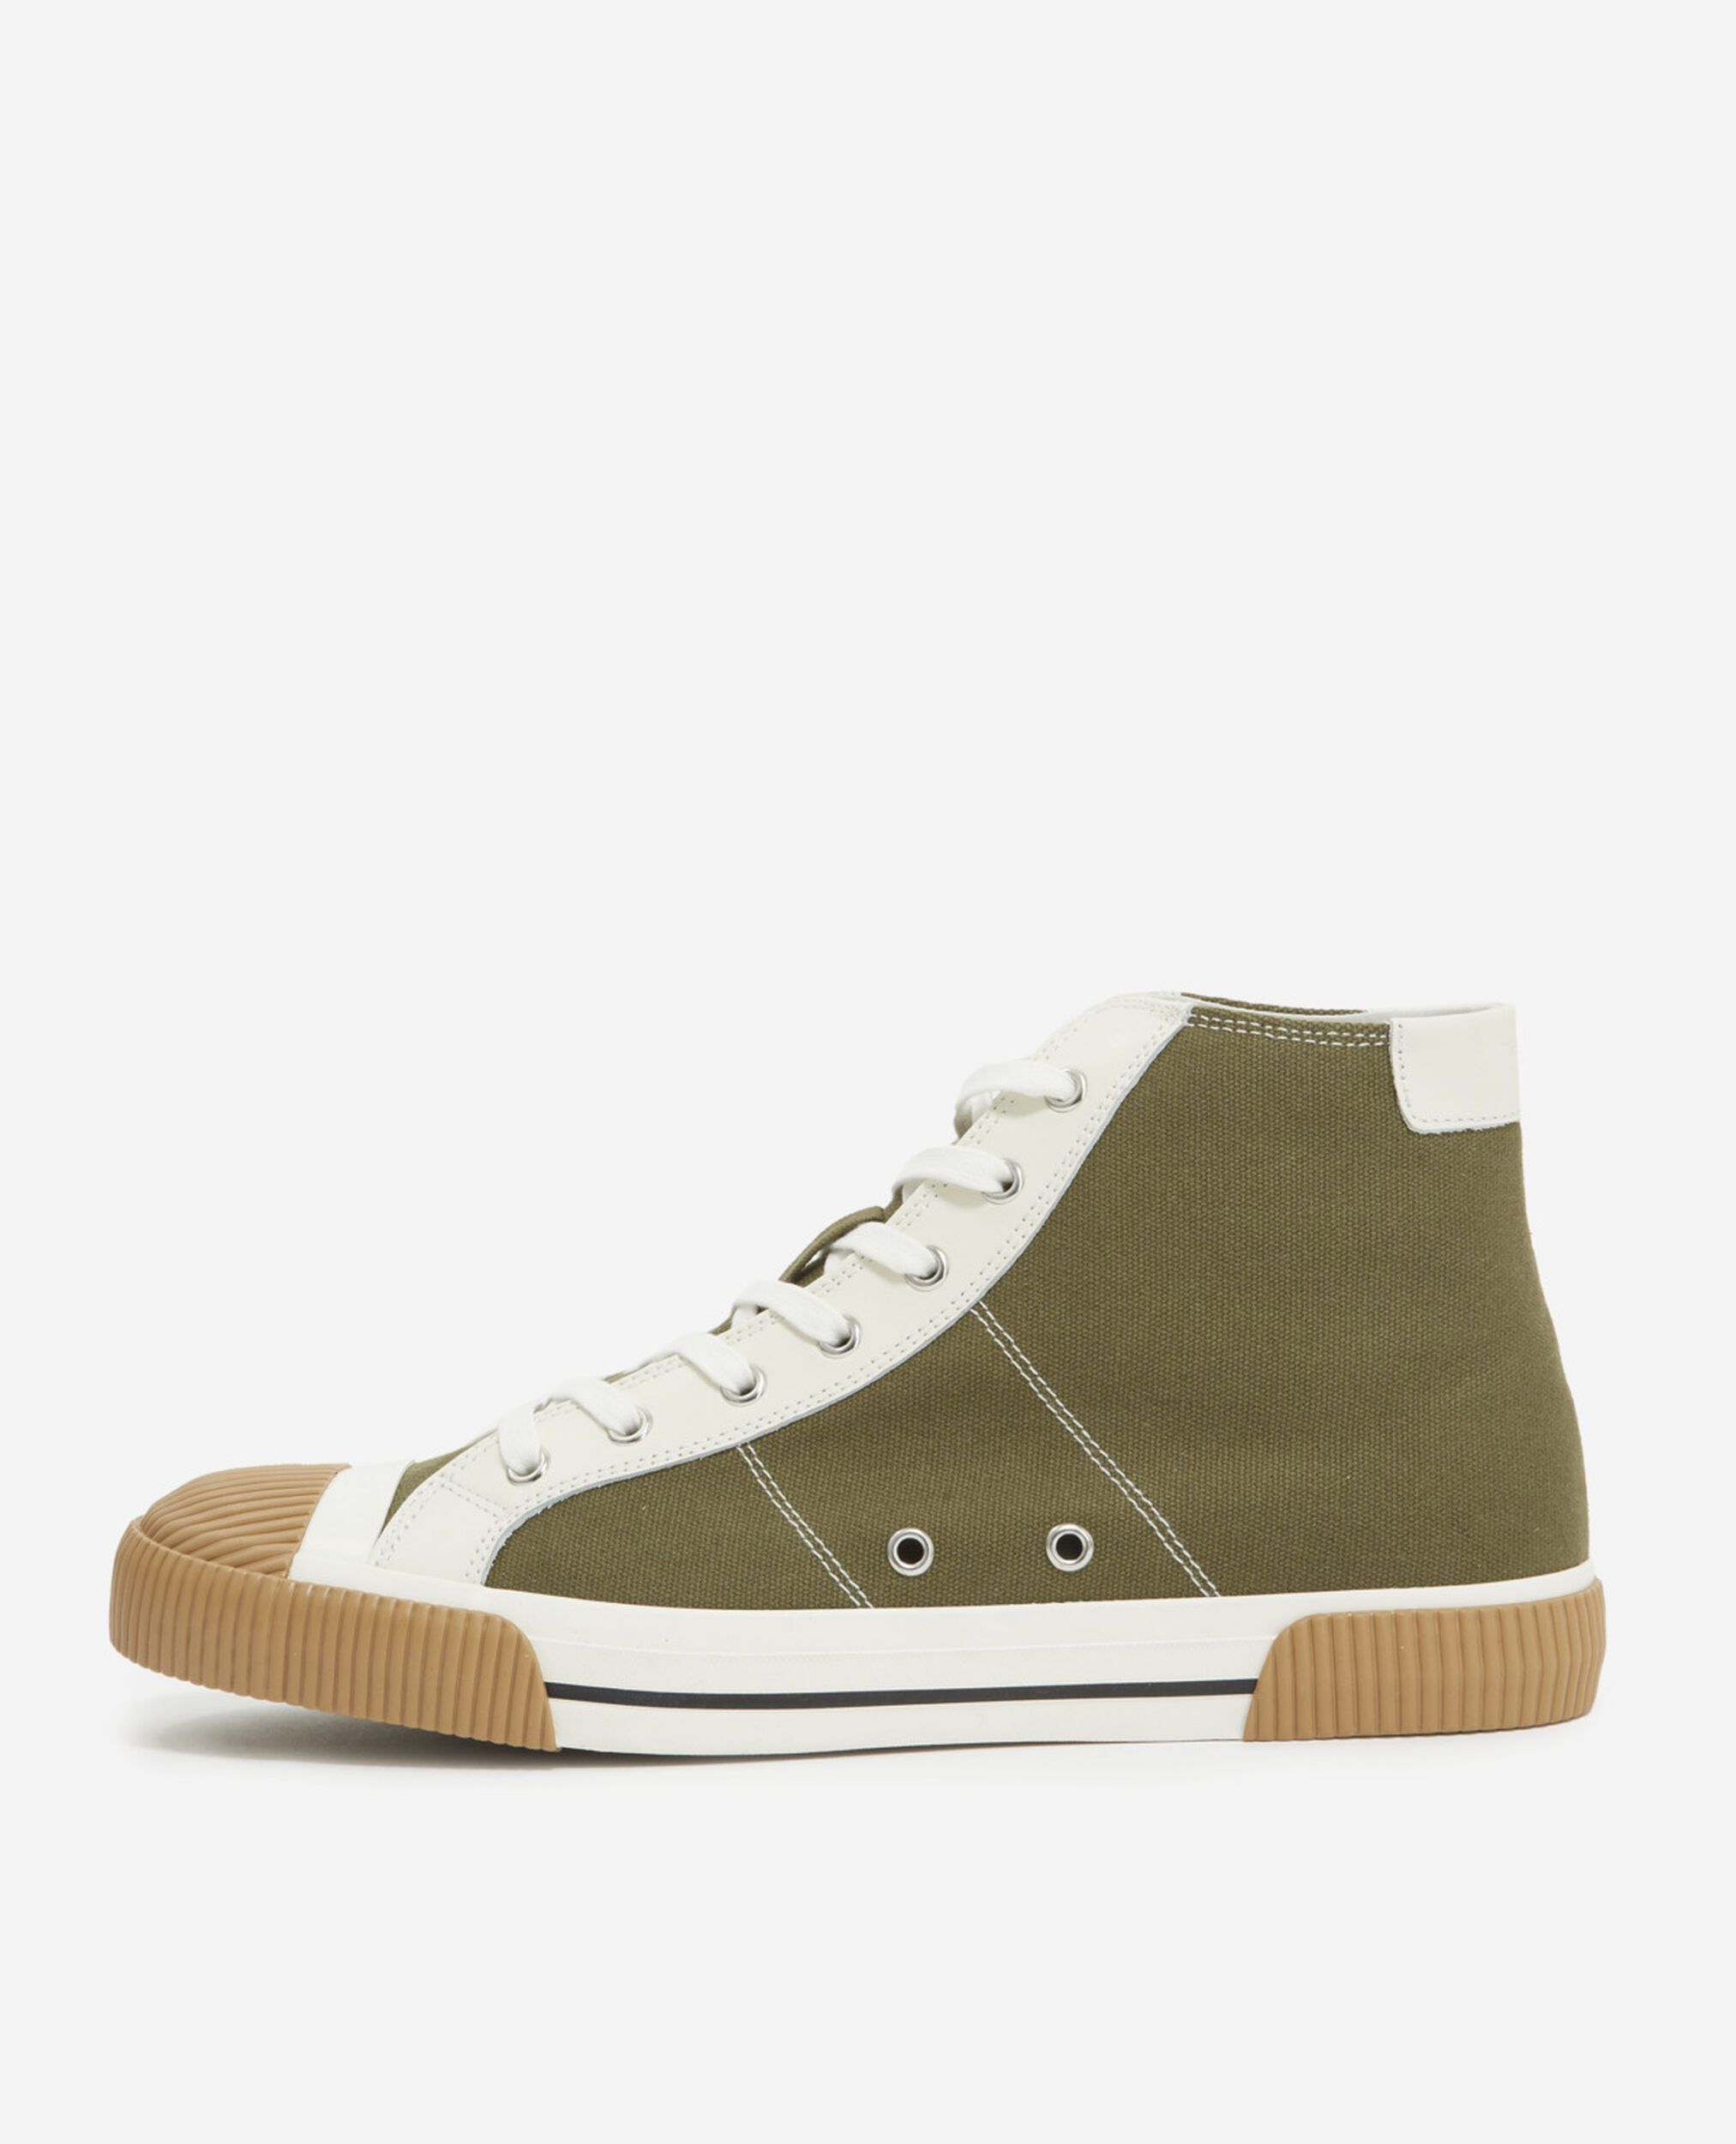 Khaki high-top lace-up canvas sneakers, KAKI, hi-res image number null